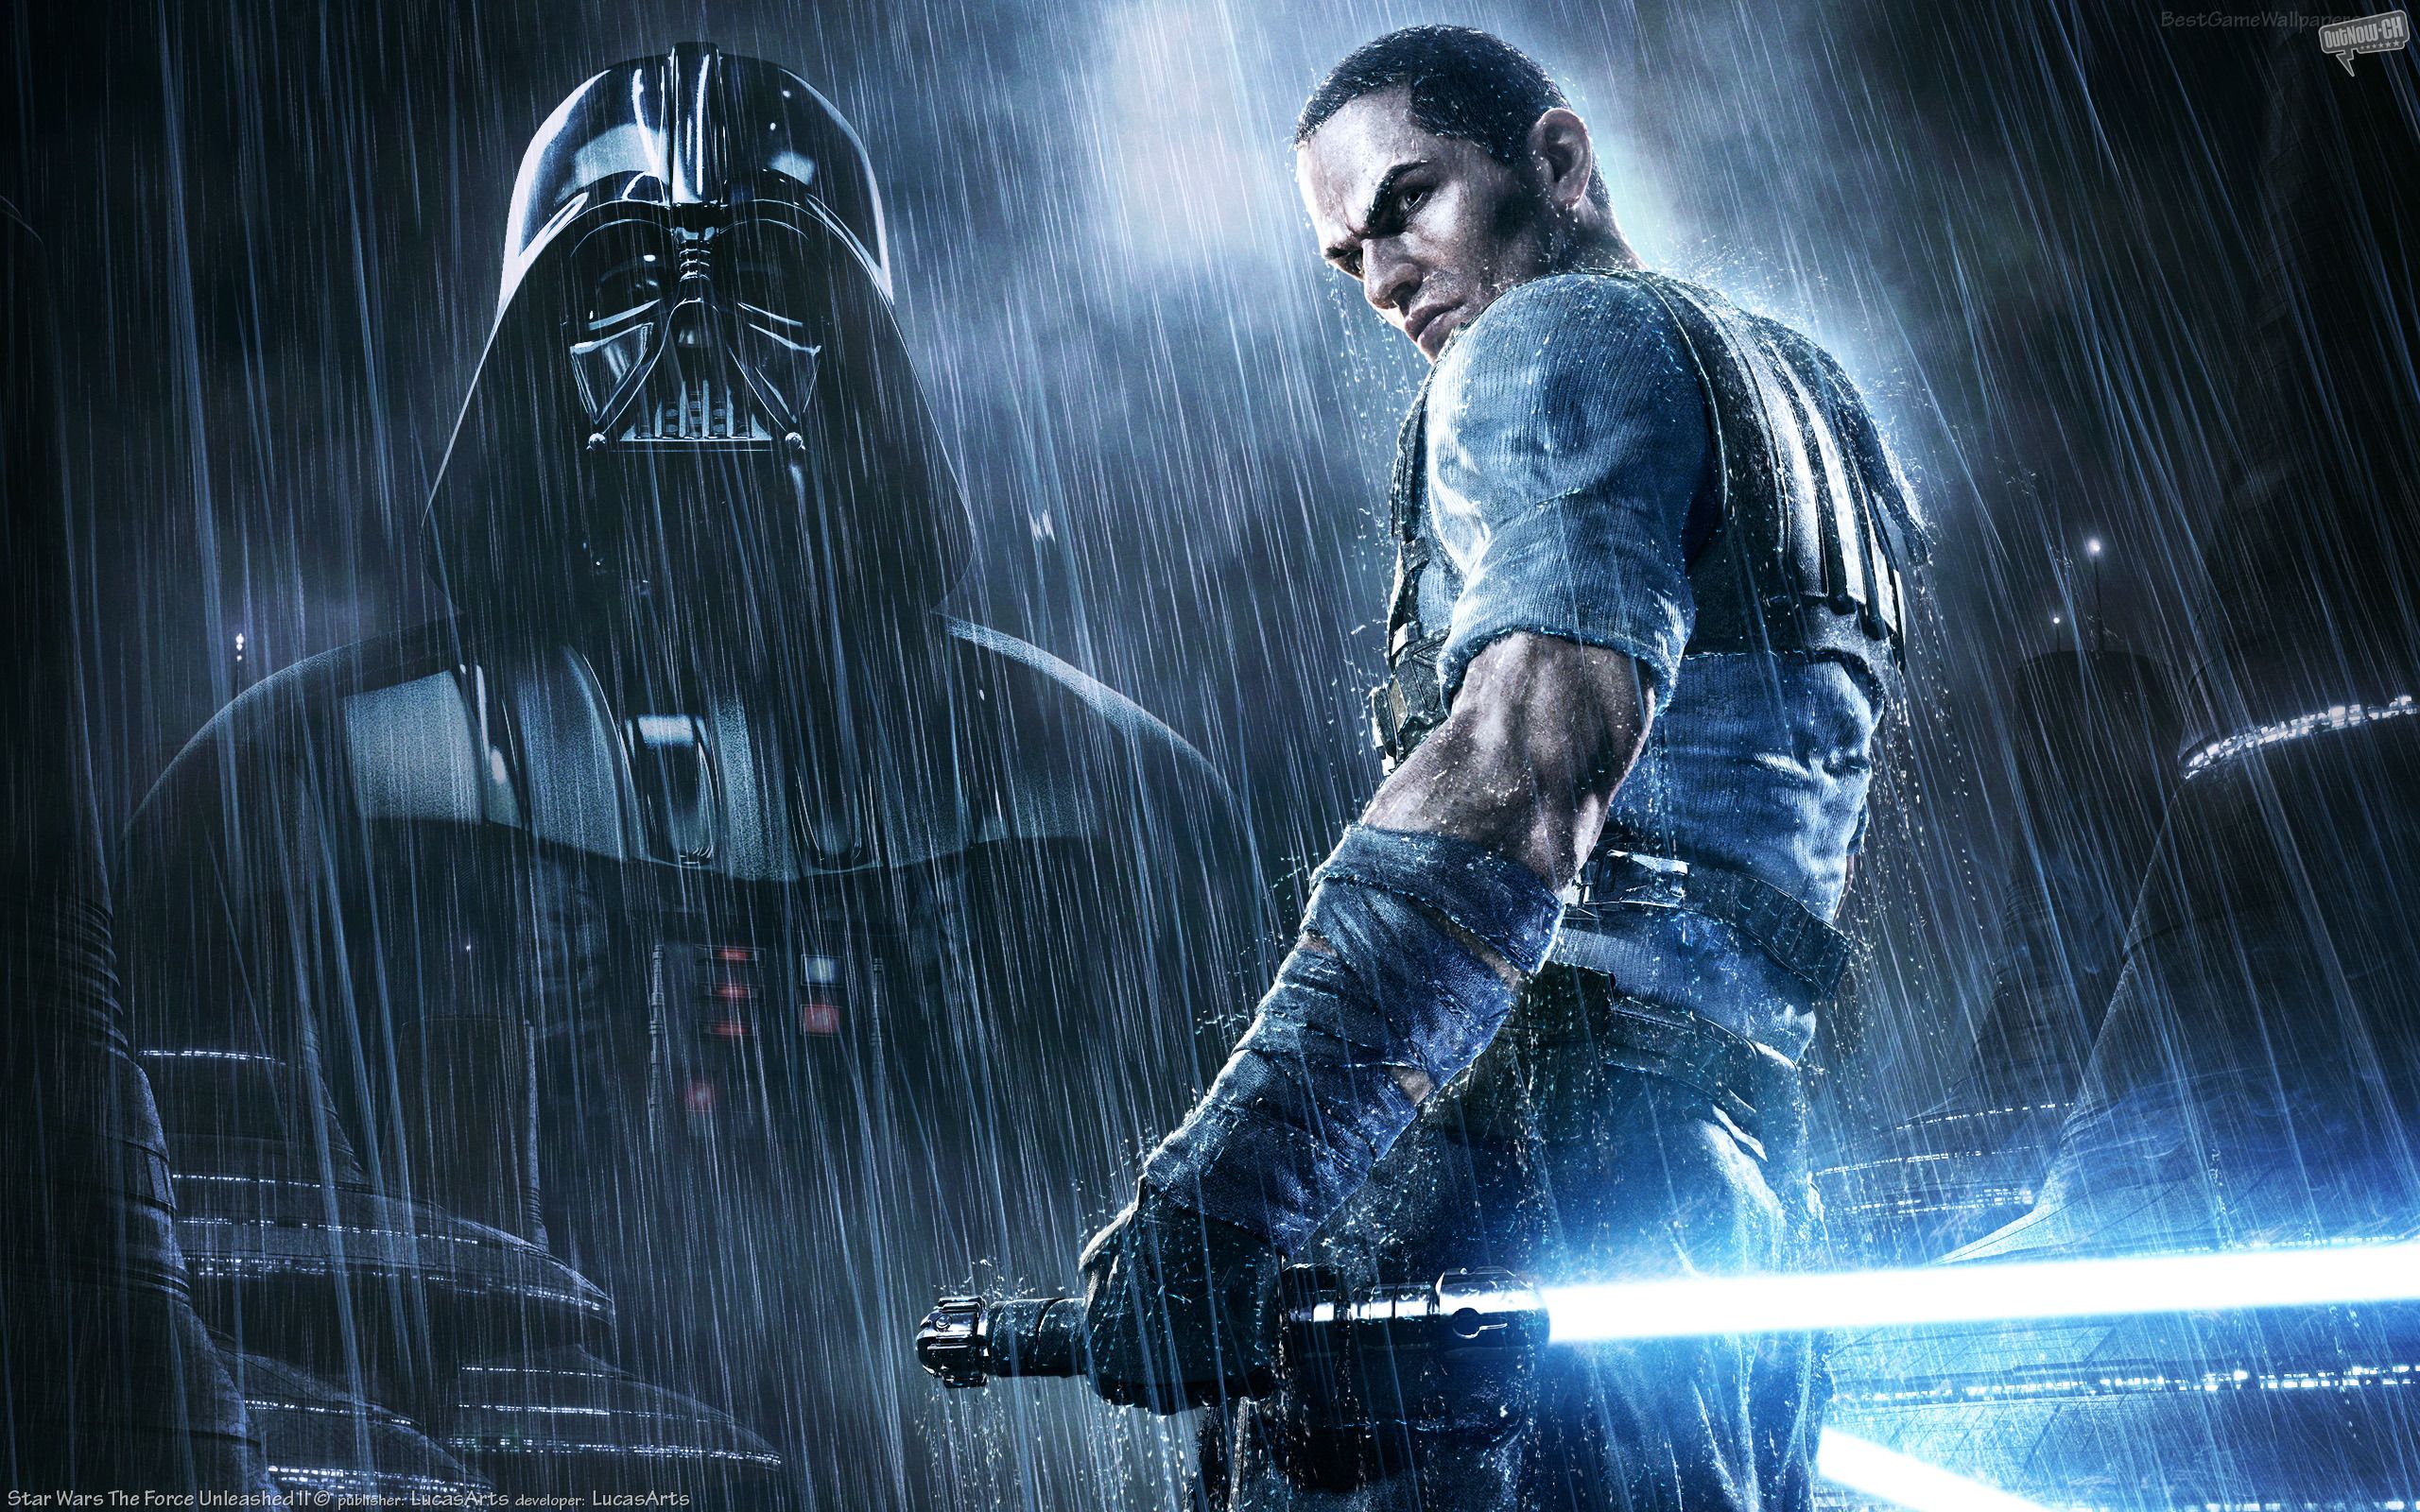 Star Wars: Force Unleashed 2 wallpapers | Star Wars: Force ...